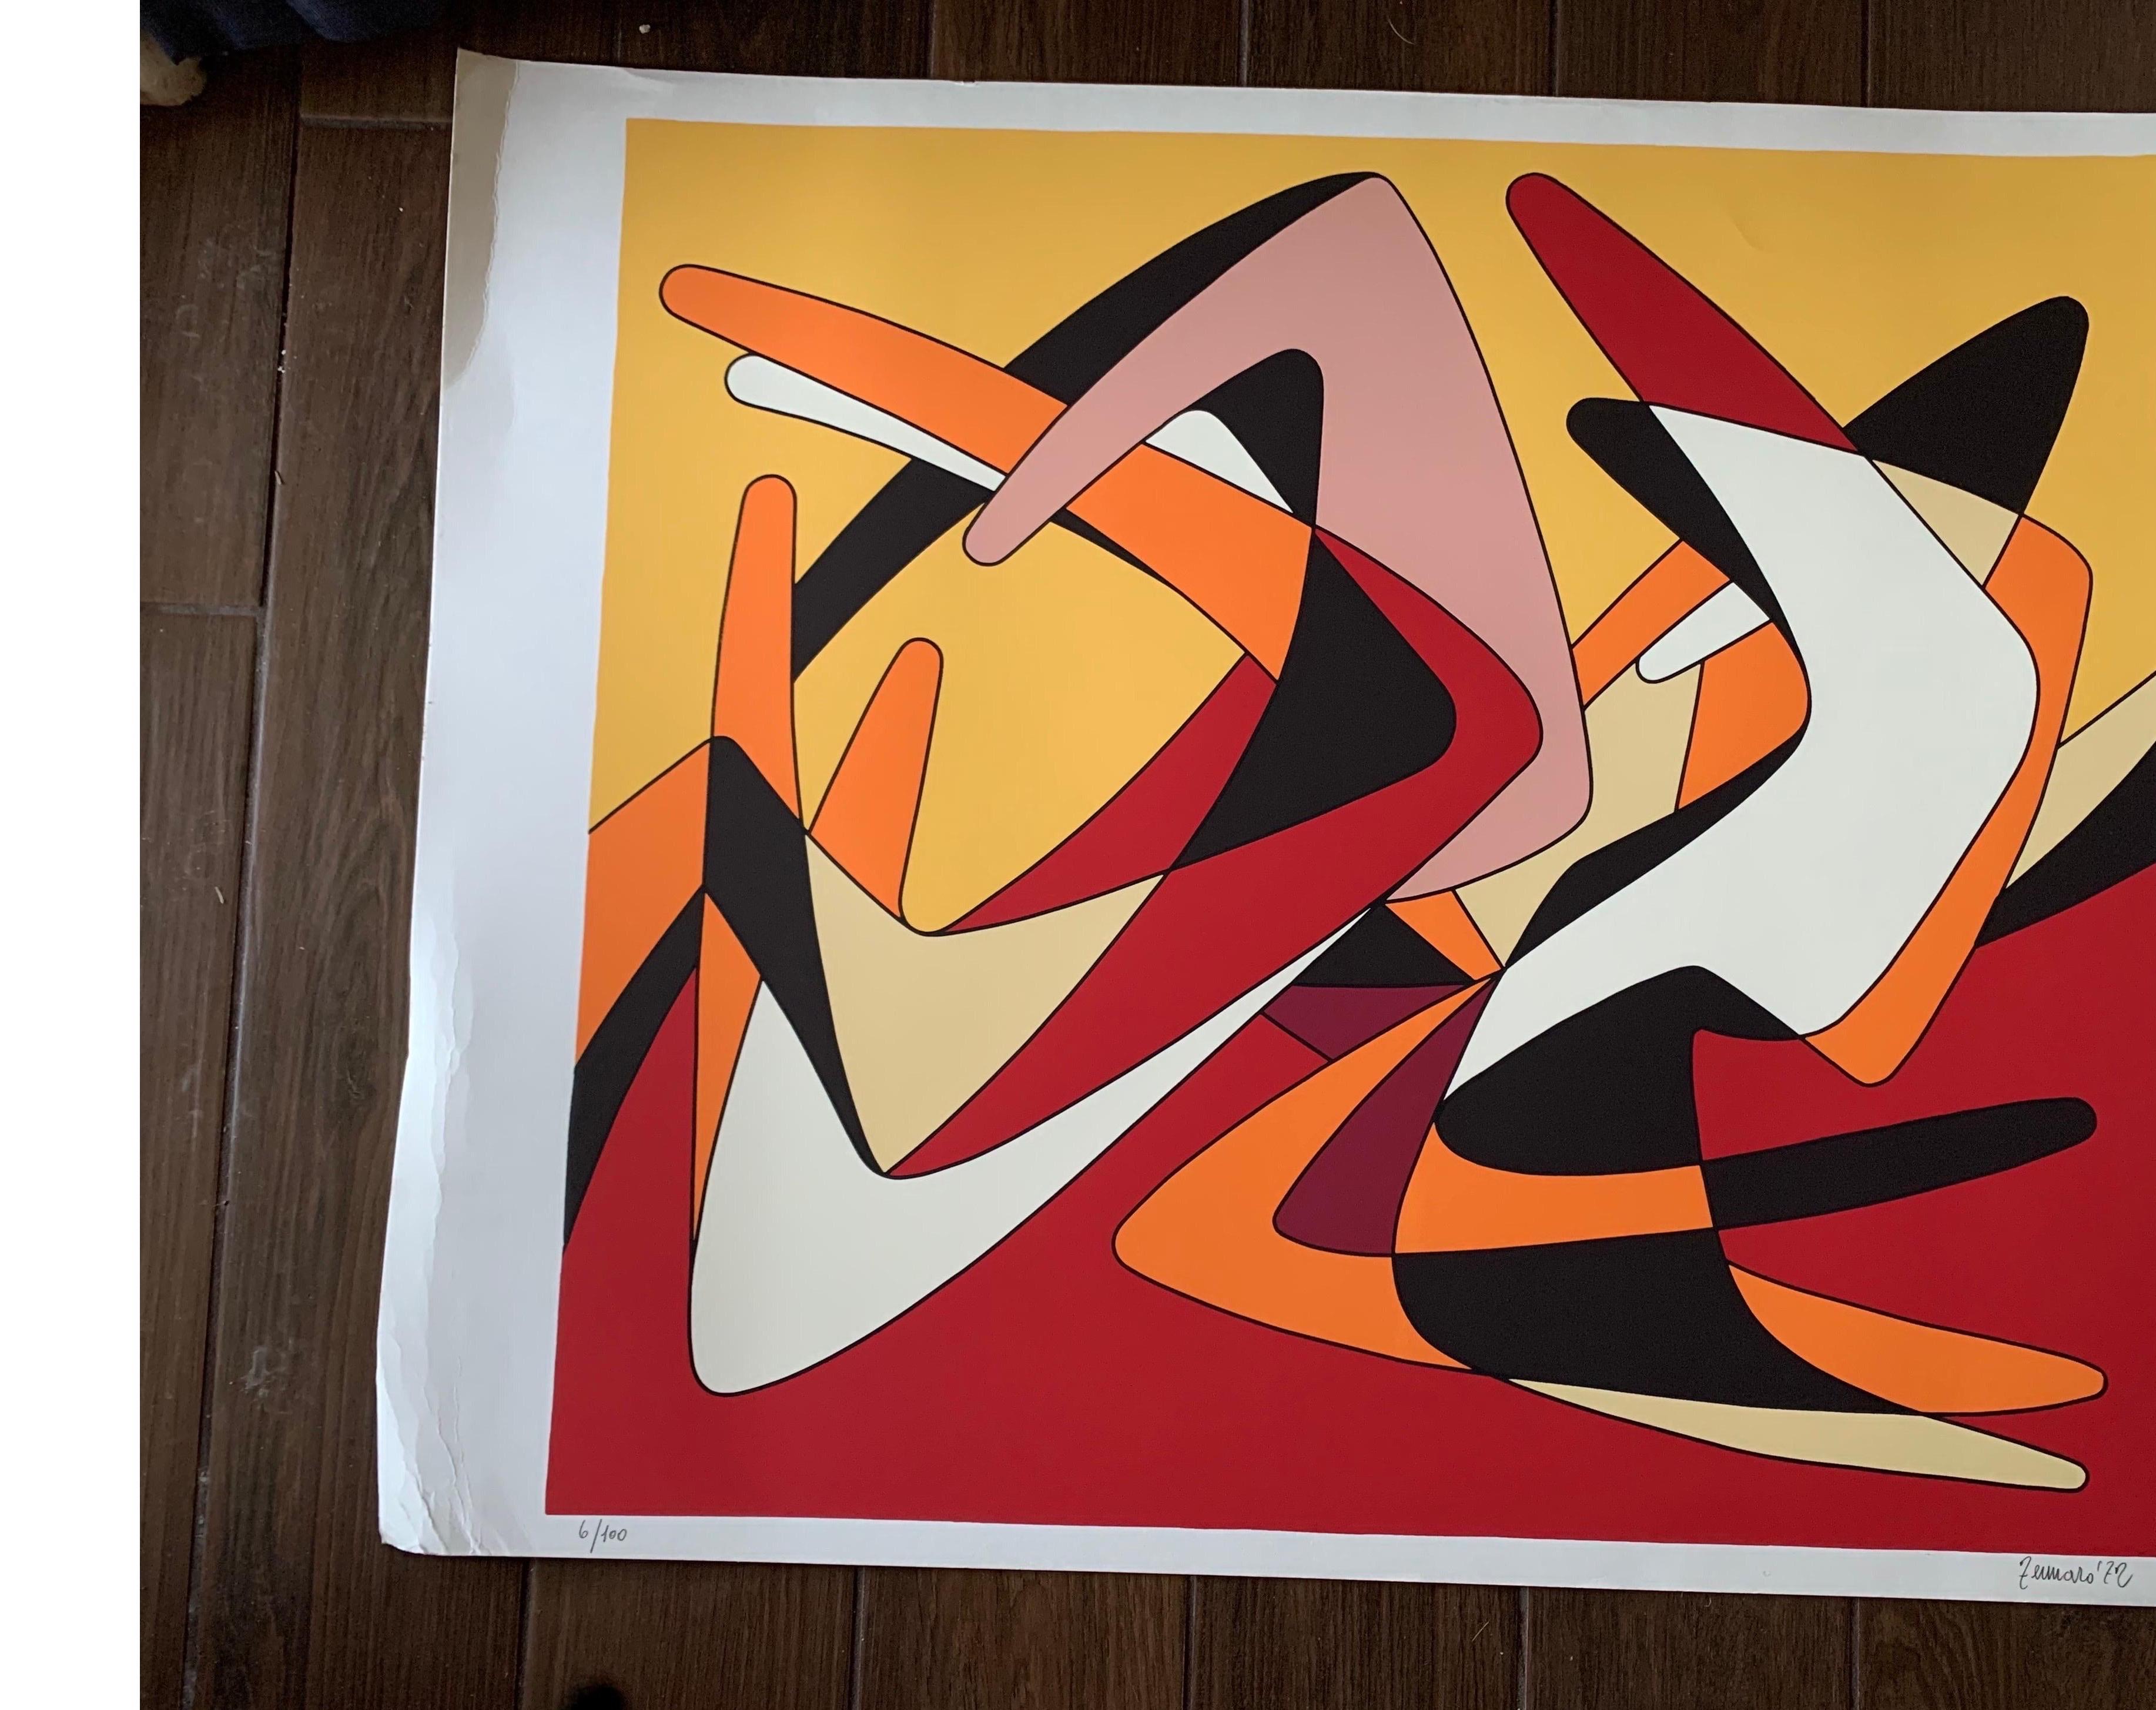 If you like Pucci and the amazing geometric modern art from Italy in the 60s and 70s, these RARE and very special artworks are for you. We have been a huge Giorgio Zennaro fan ever since we discovered his work in a fabulous art gallery in Venice,